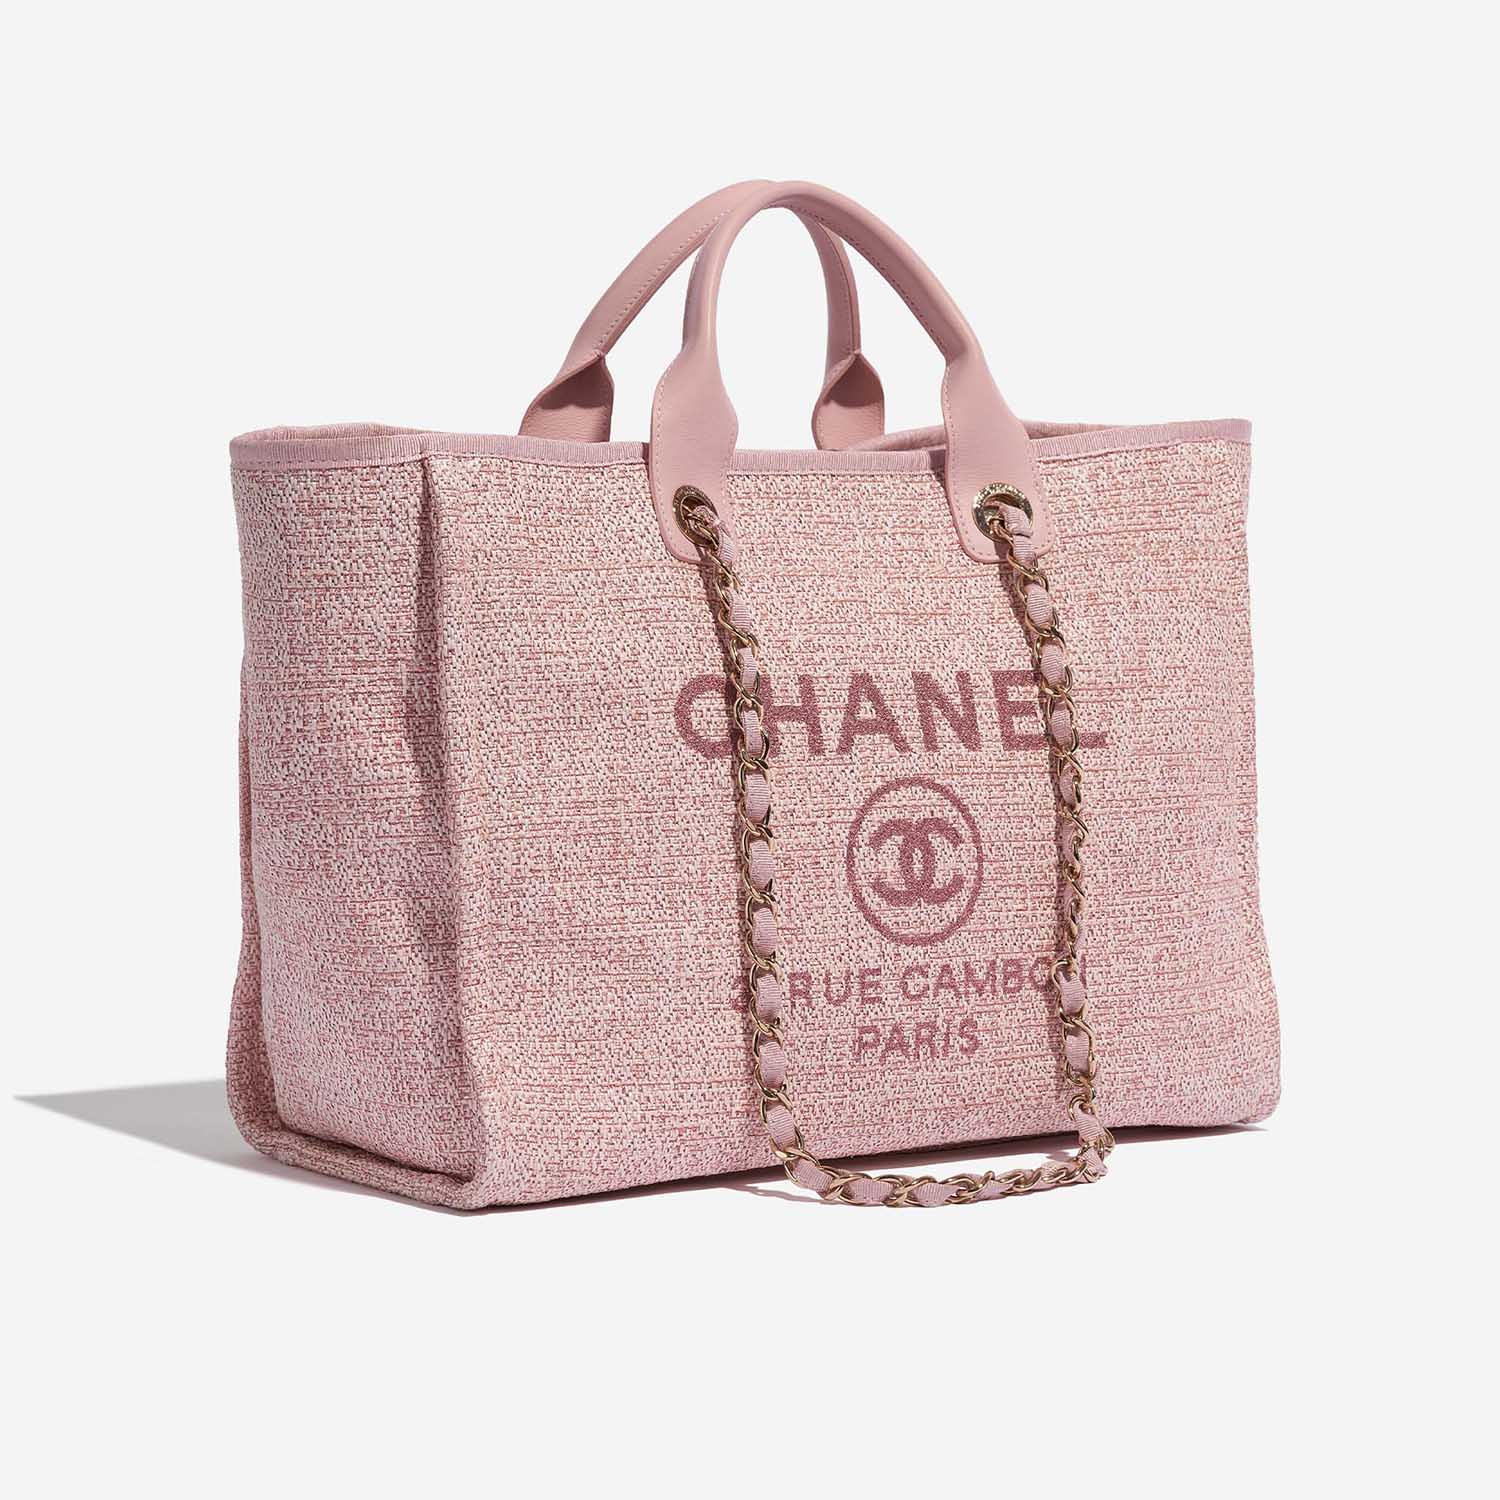 Pre-owned Chanel bag Deauville Medium Tweed Pink Pink Side Front | Sell your designer bag on Saclab.com